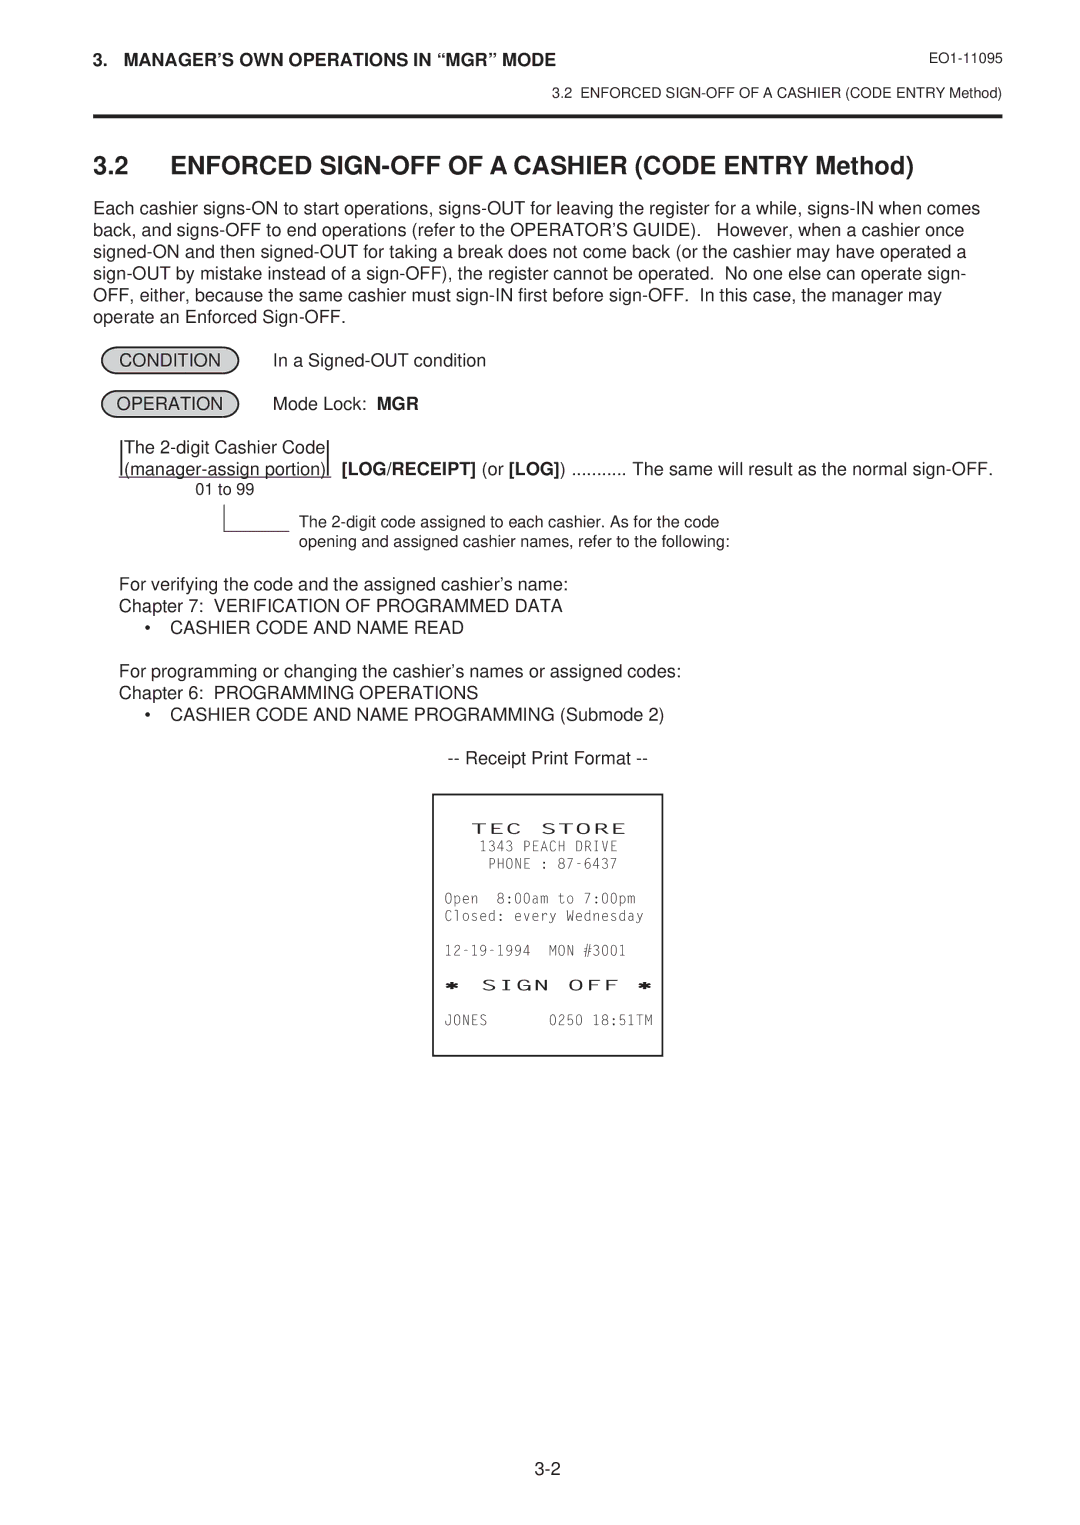 Toshiba EO1-11095 Enforced SIGN-OFF of a Cashier Code Entry Method, LOG/RECEIPT or LOG, Cashier Code and Name Read 